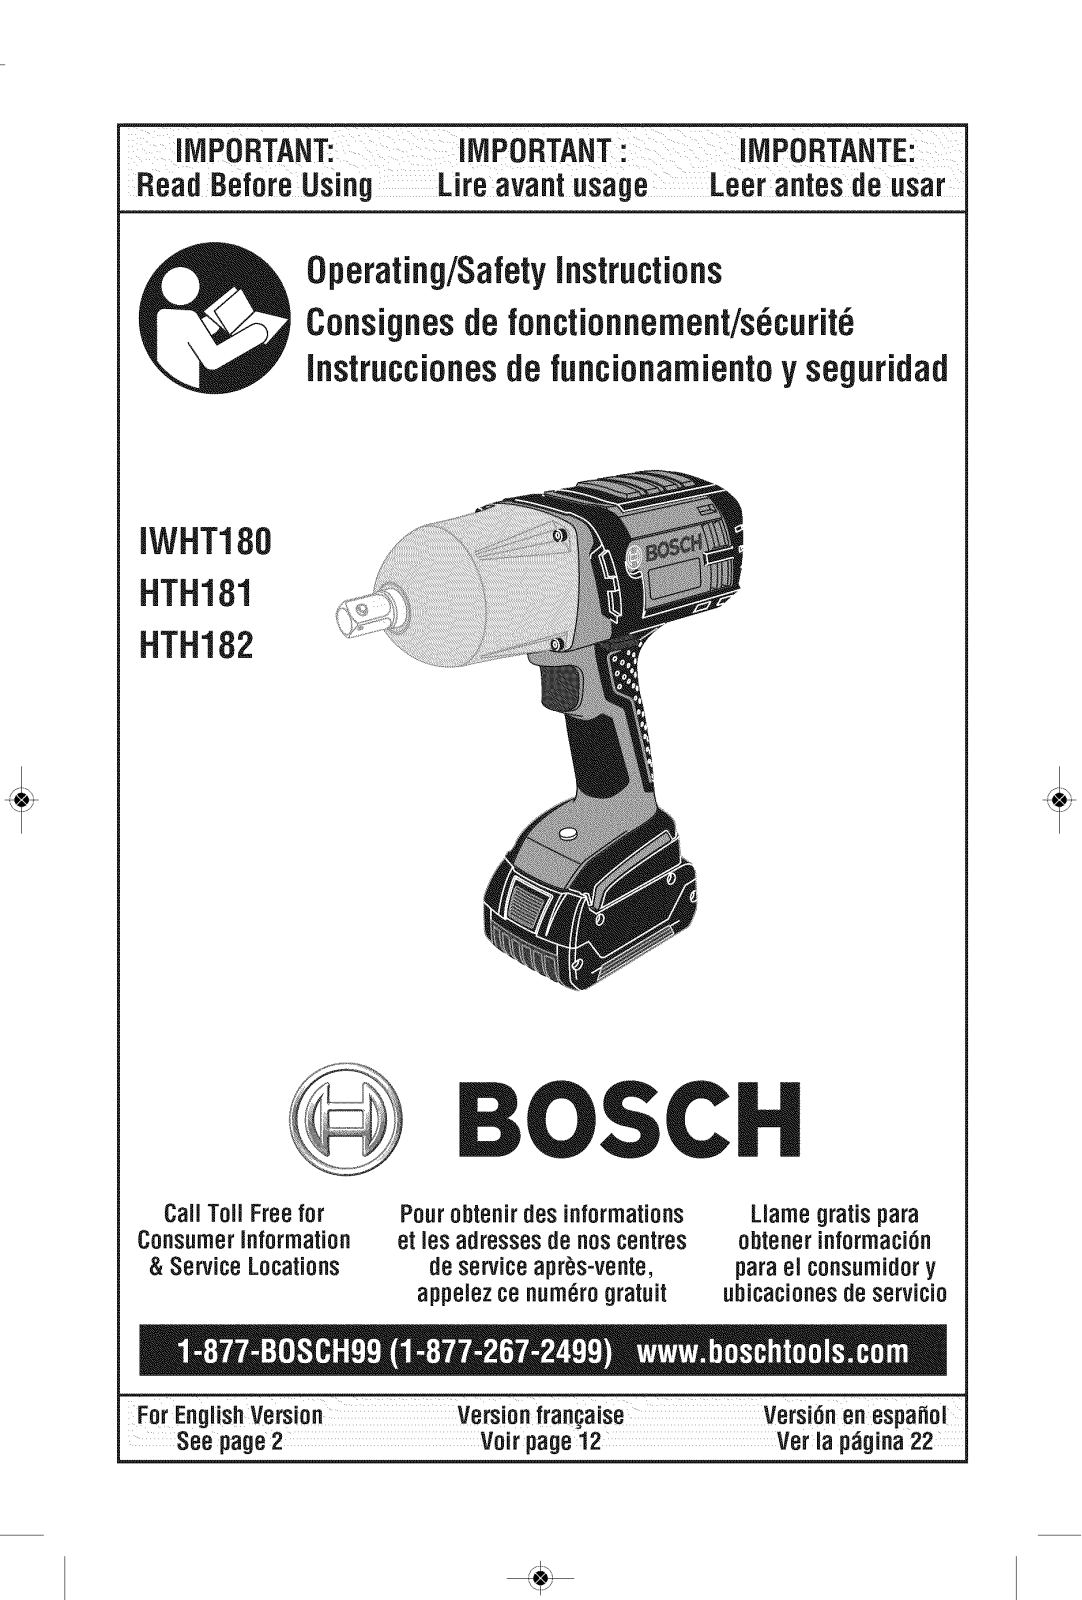 Bosch IWHT180-01, HTH181-01 Owner’s Manual